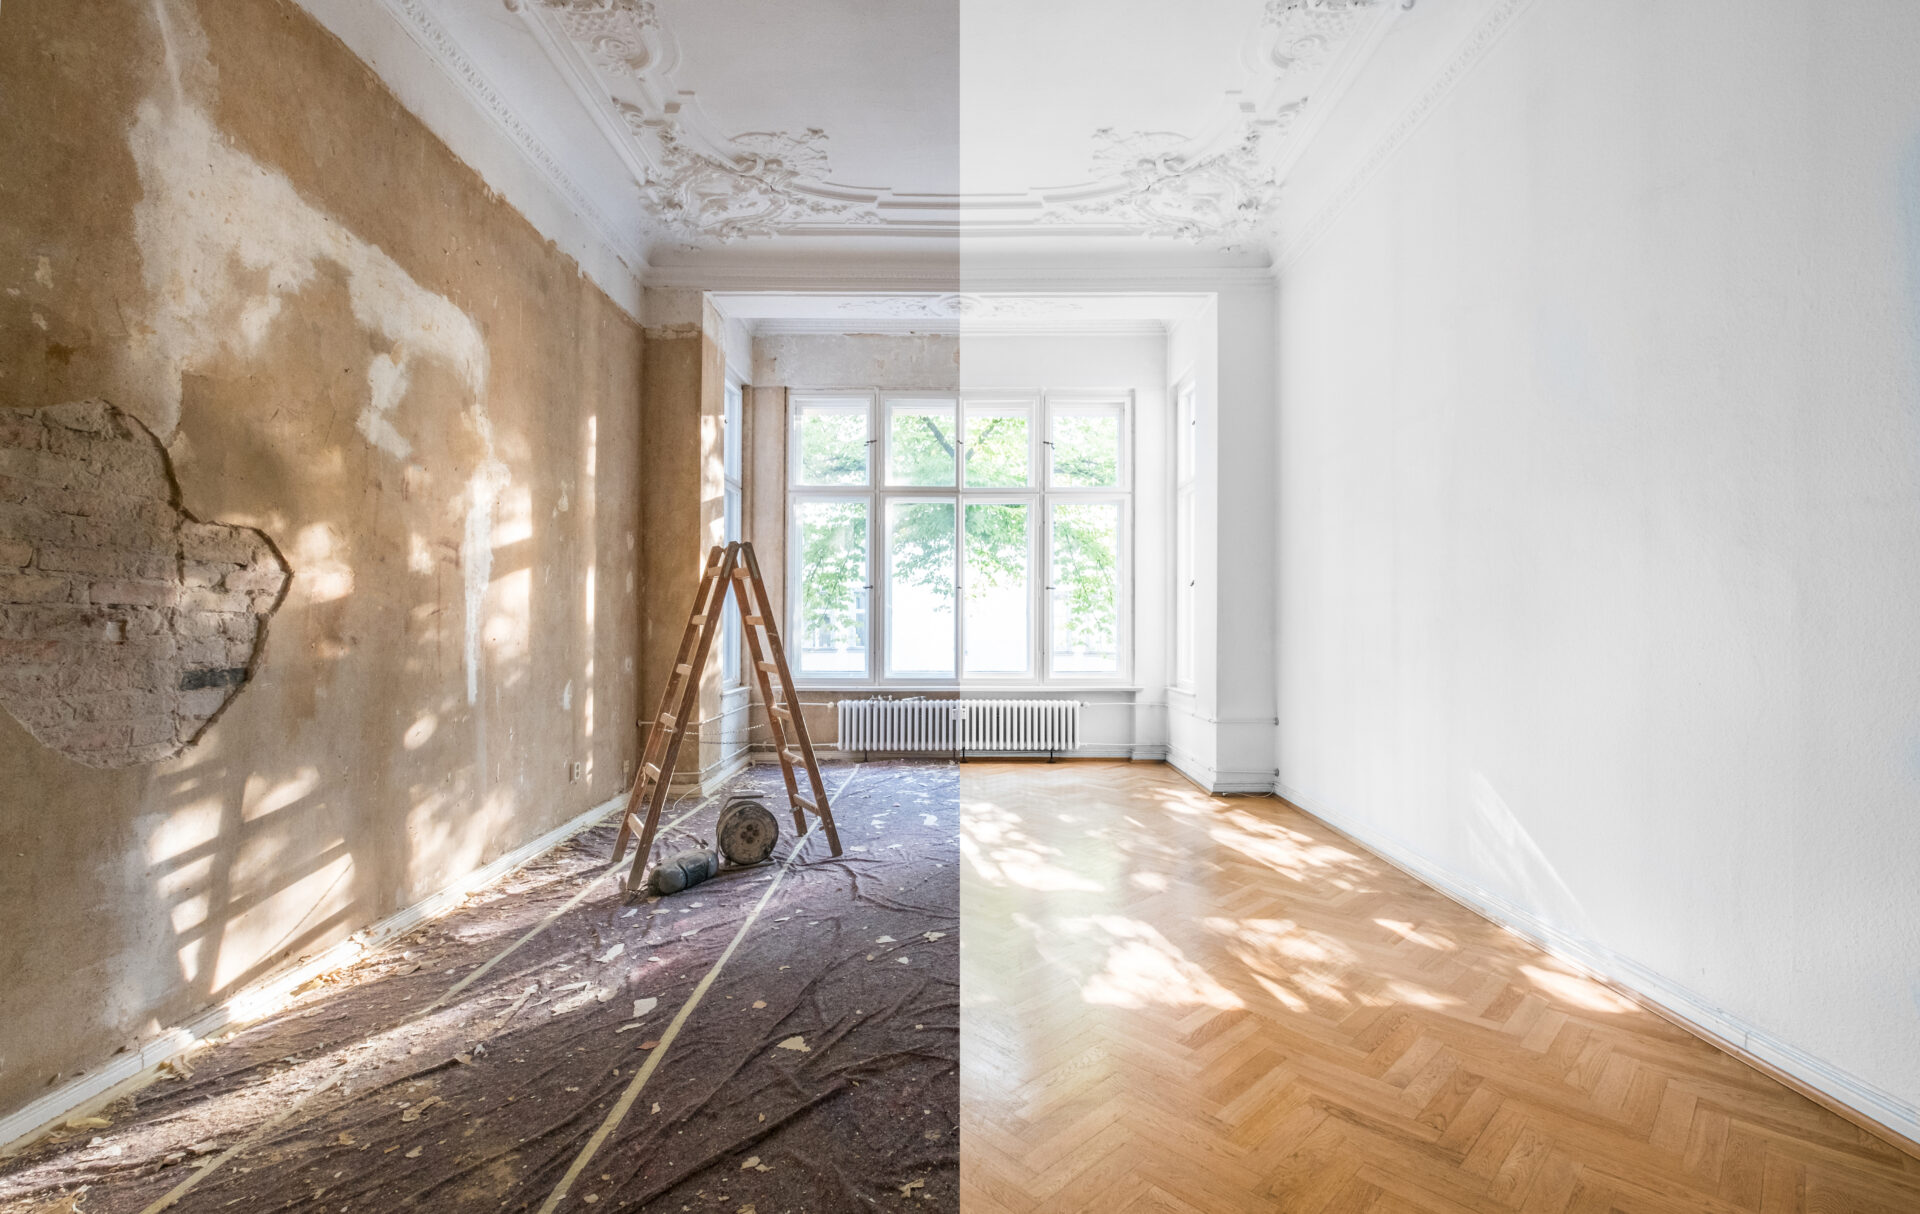 Before and after custom home renovations for empty apartment. MidCity Plumbers